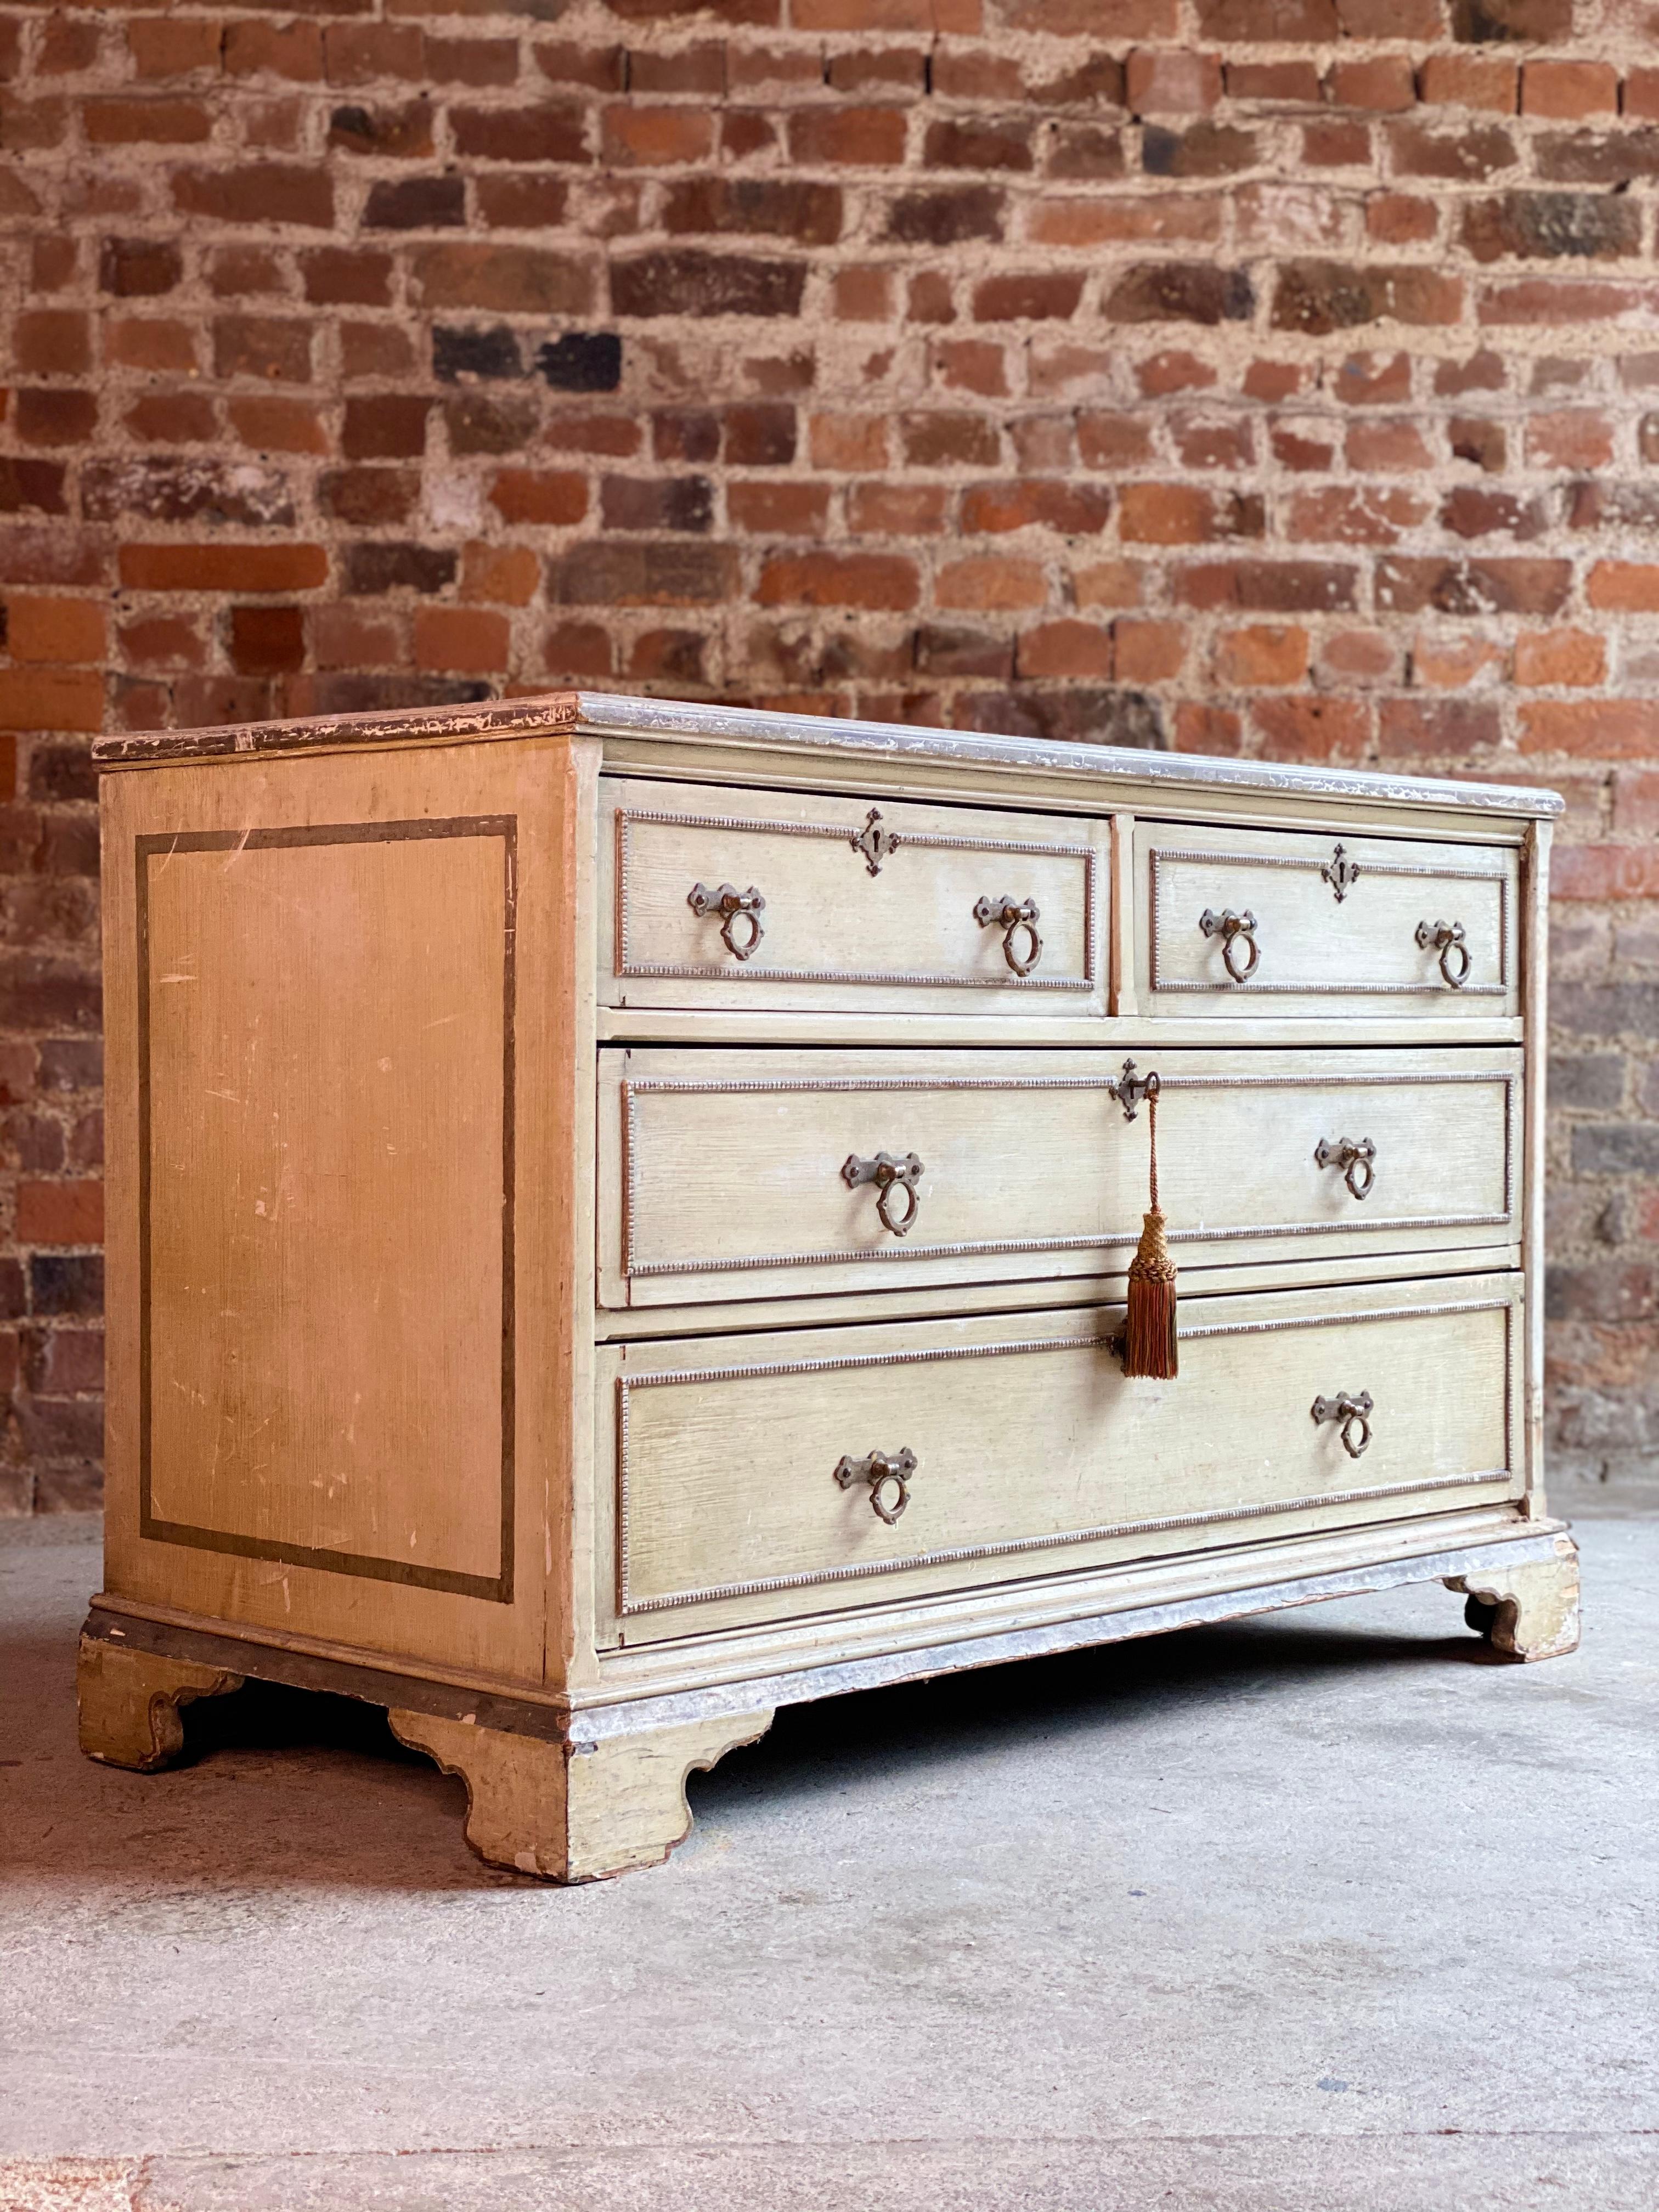 Antique Gustavian chest of drawers commode, Swedish, 19th century, circa 1870

A magnificent 19th century Swedish Gustavian four-drawer chest of drawers circa 1870, the rectangular top sitting above two short over two long drawers, the drawer